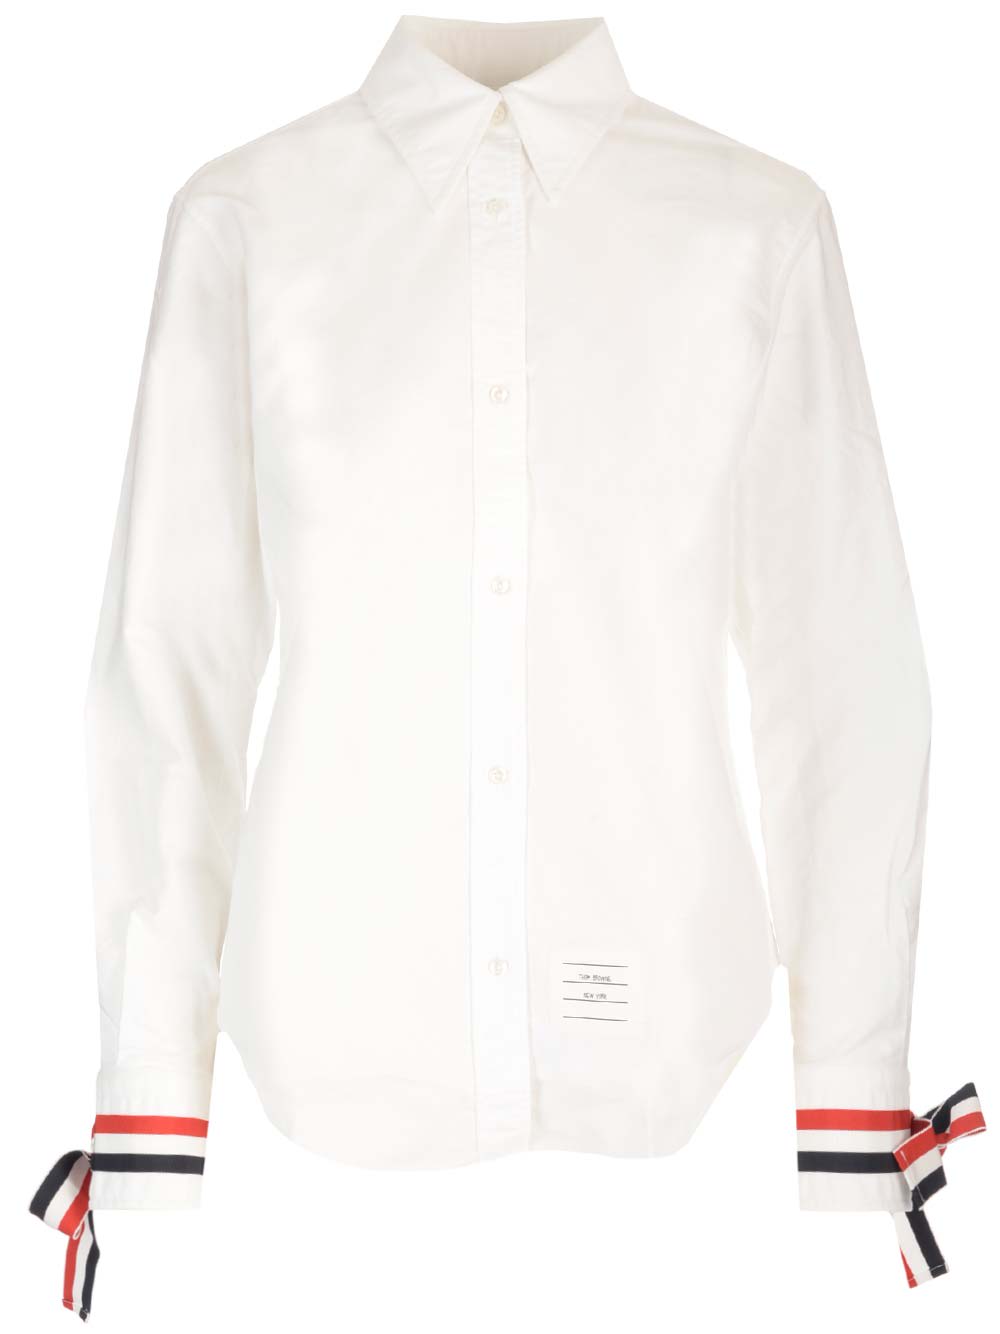 THOM BROWNE SHIRT WITH CONTRASTING CUFFS